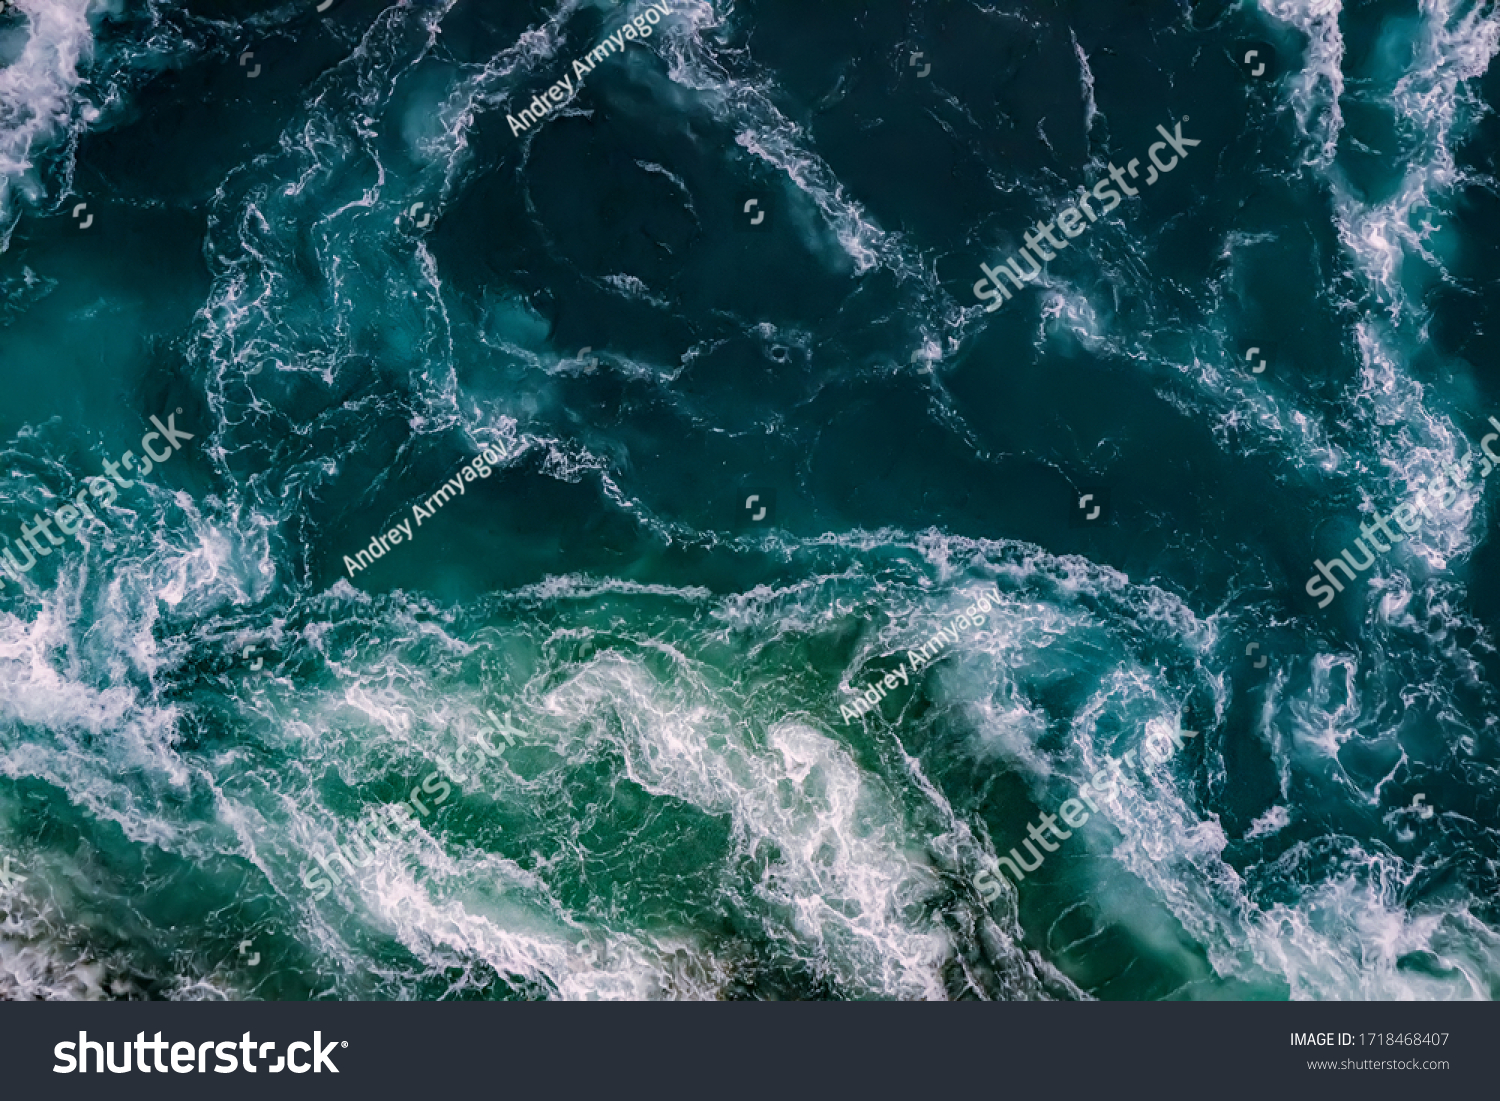 Abstract background. Waves of water of the river and the sea meet each other during high tide and low tide. Whirlpools of the maelstrom of Saltstraumen, Nordland, Norway #1718468407